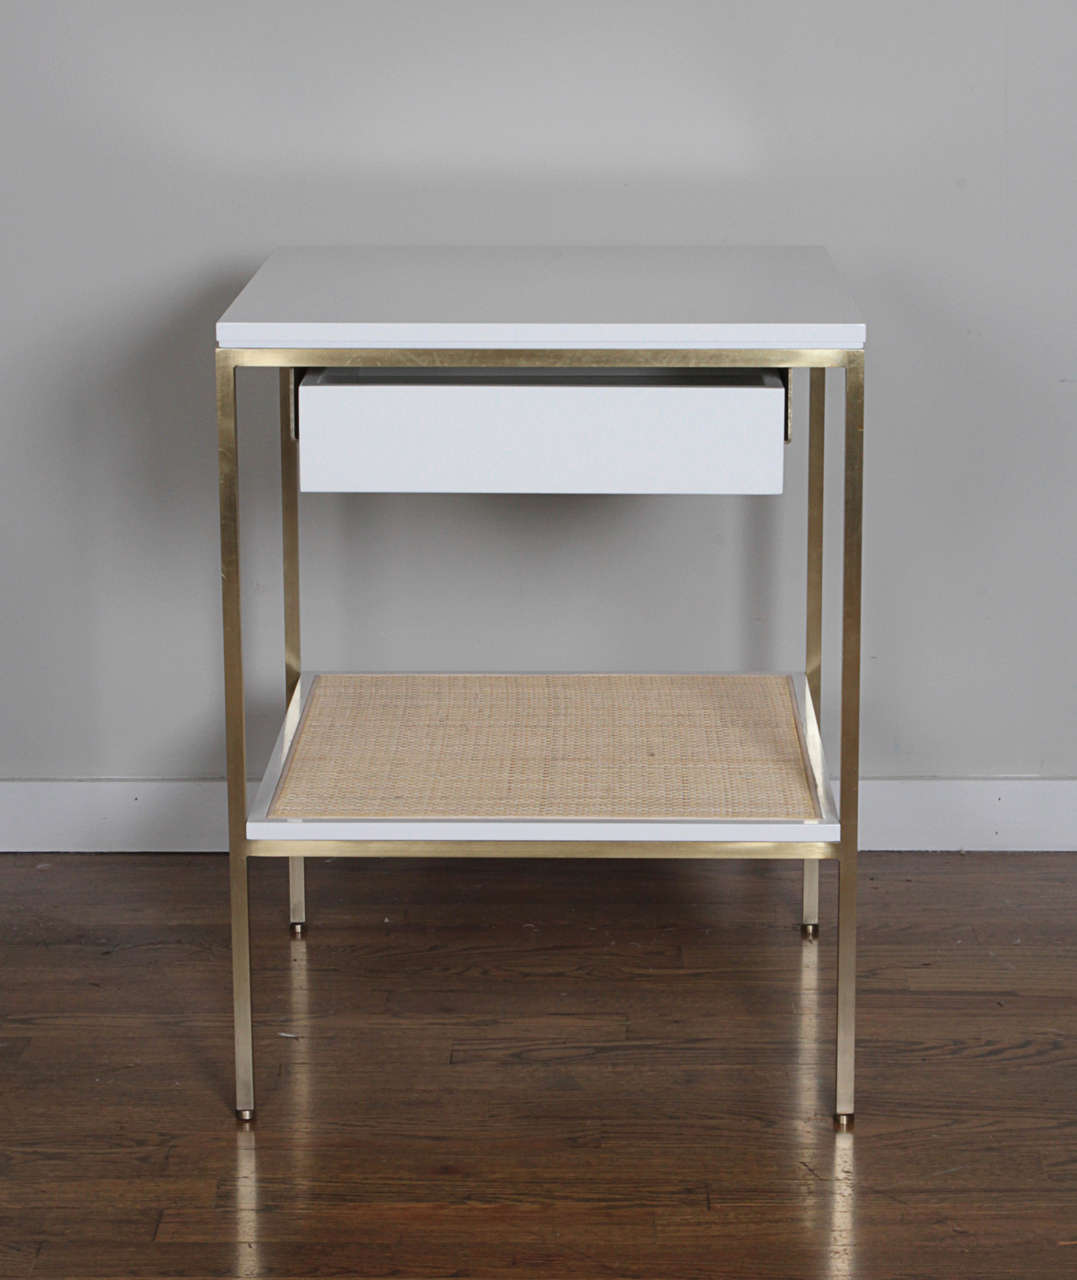 ReGeneration has been making bespoke furniture since the early 2000s. This pair of their signature, re: 392 lacquer and brass bedside tables are in stock in BM Soft chamois buffed lacquer on solid brass frames.